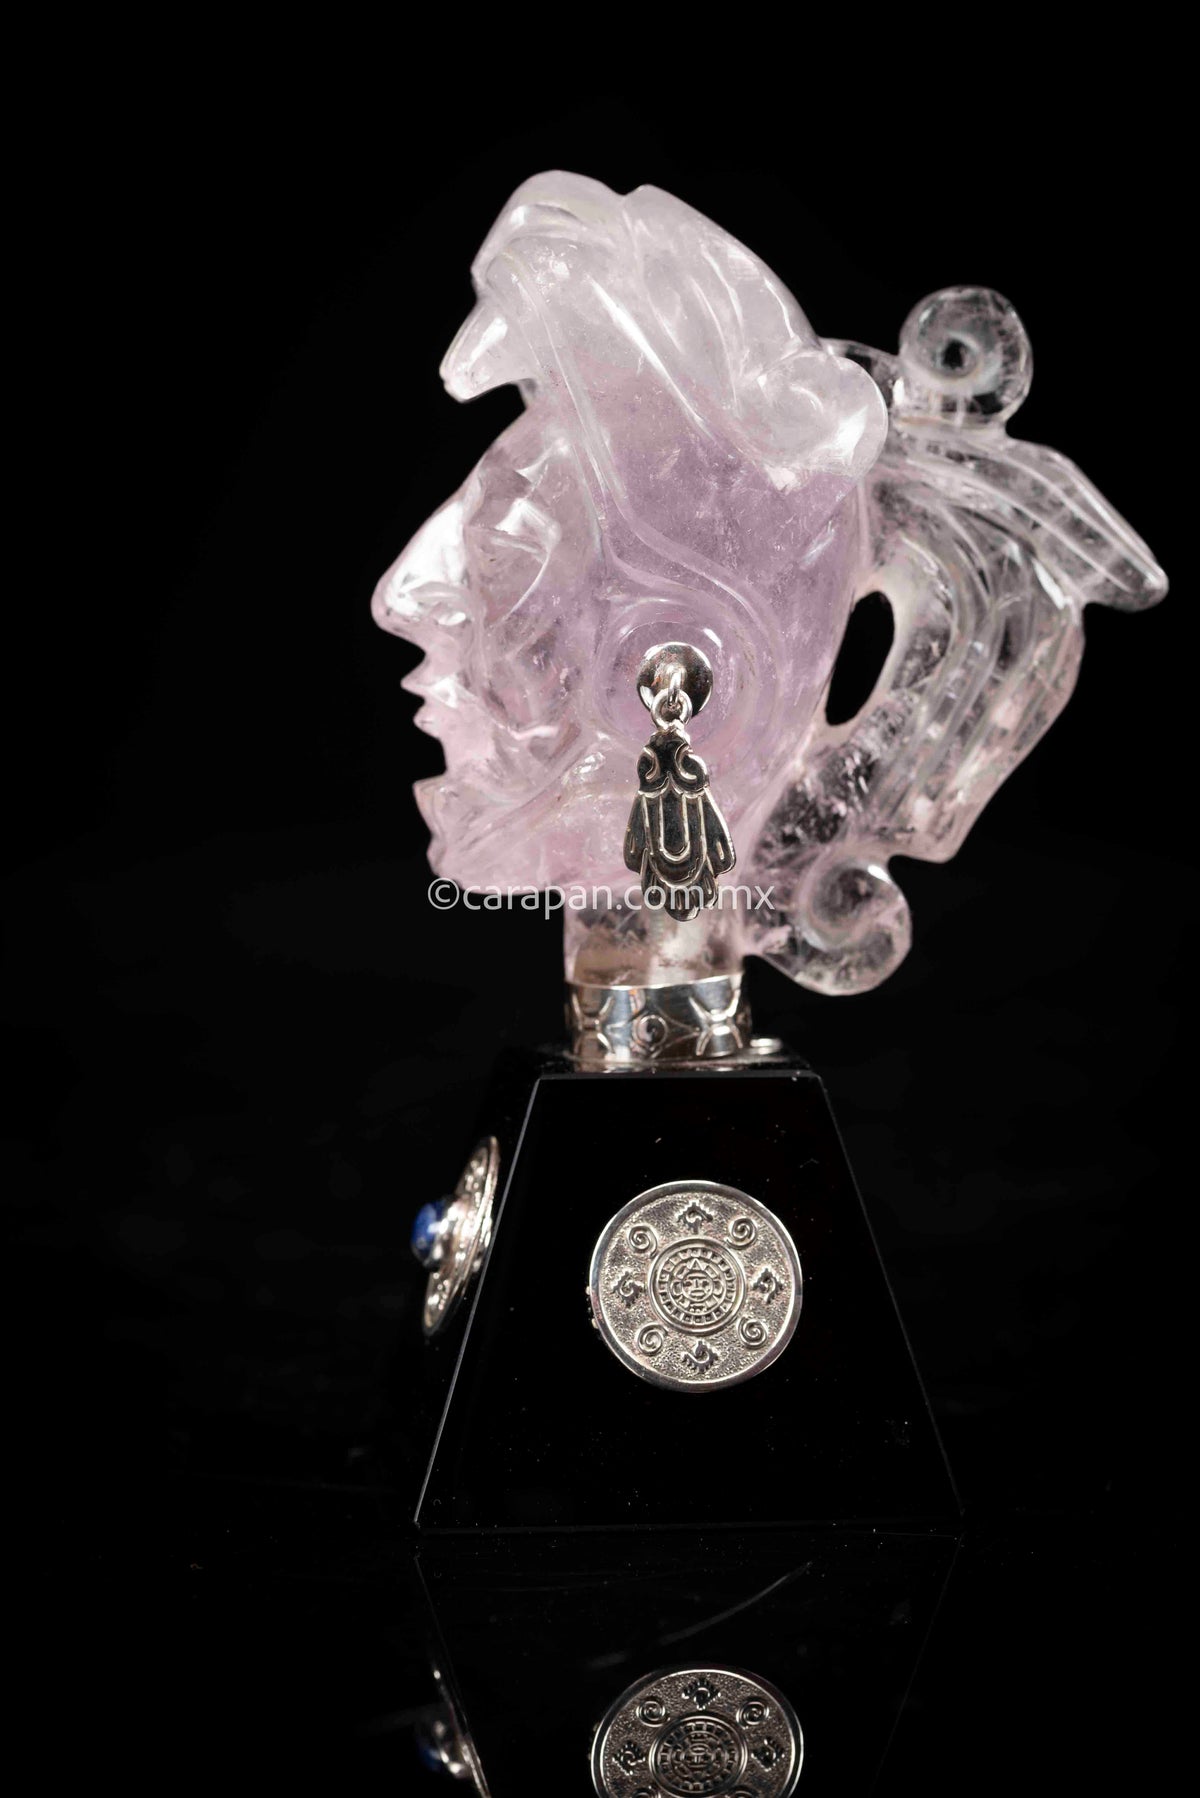 Jaguar Knight Head Sculpture Crafted in Amethyst with Silver & Lapis Lasuli on Obsidian base